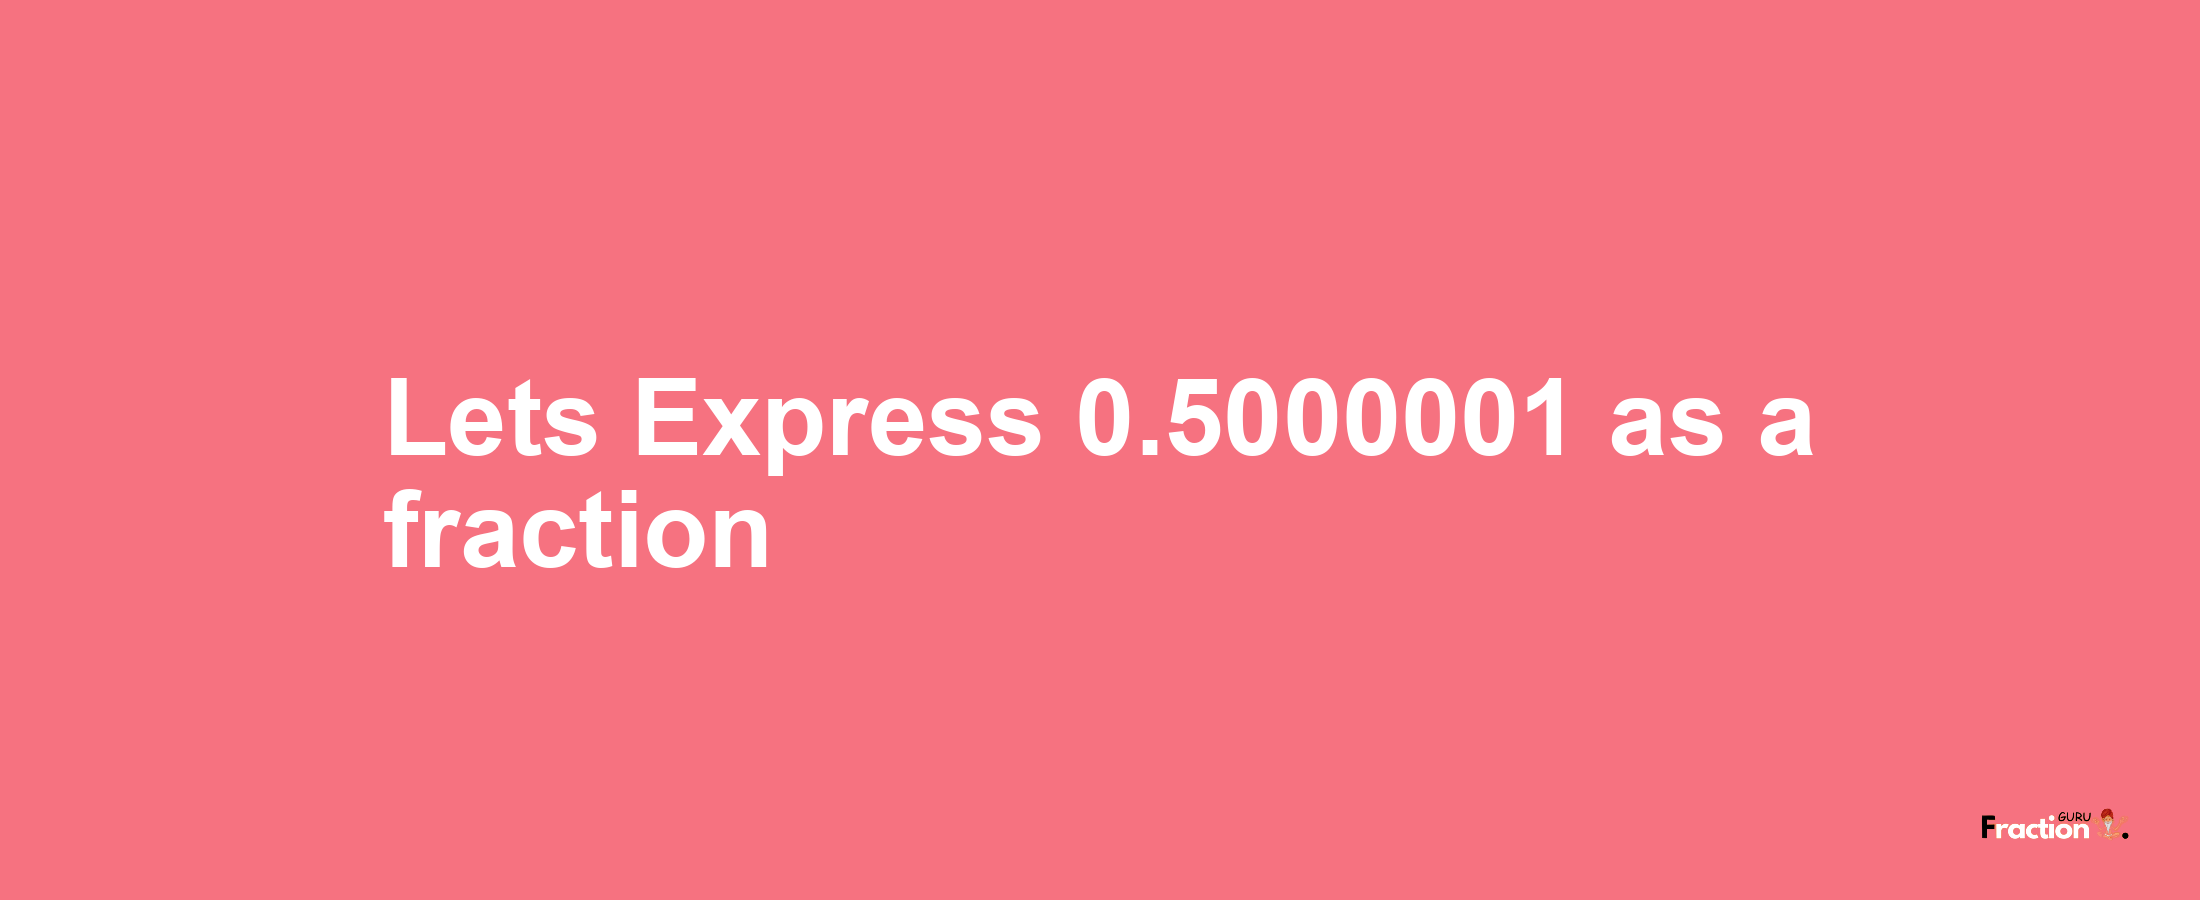 Lets Express 0.5000001 as afraction